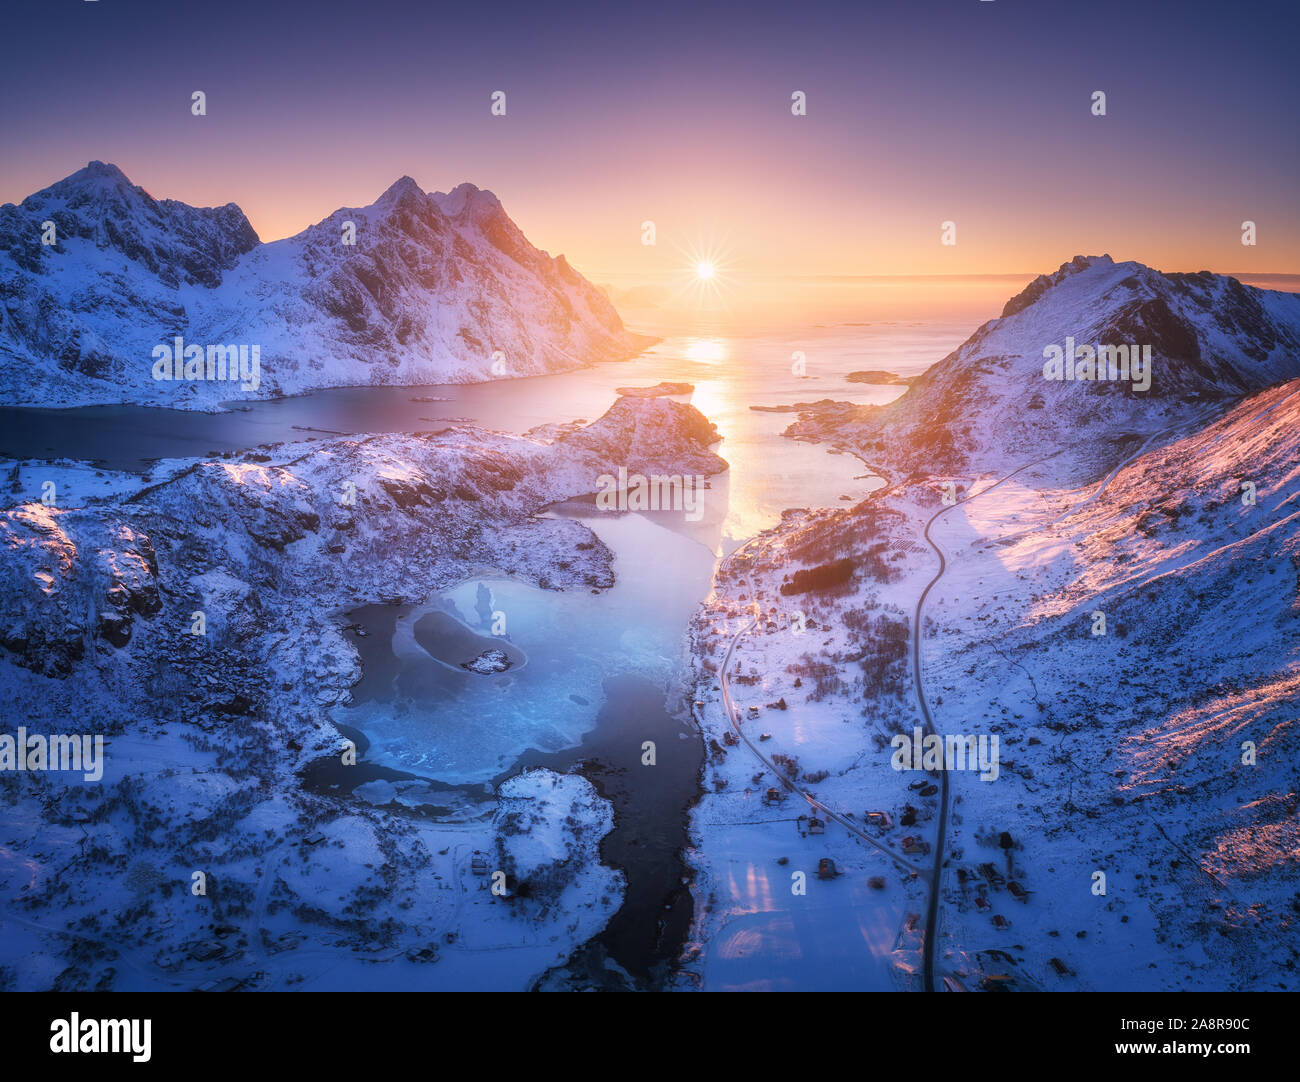 Aerial view of snowy mountains, sea, purple sky at sunset Stock Photo